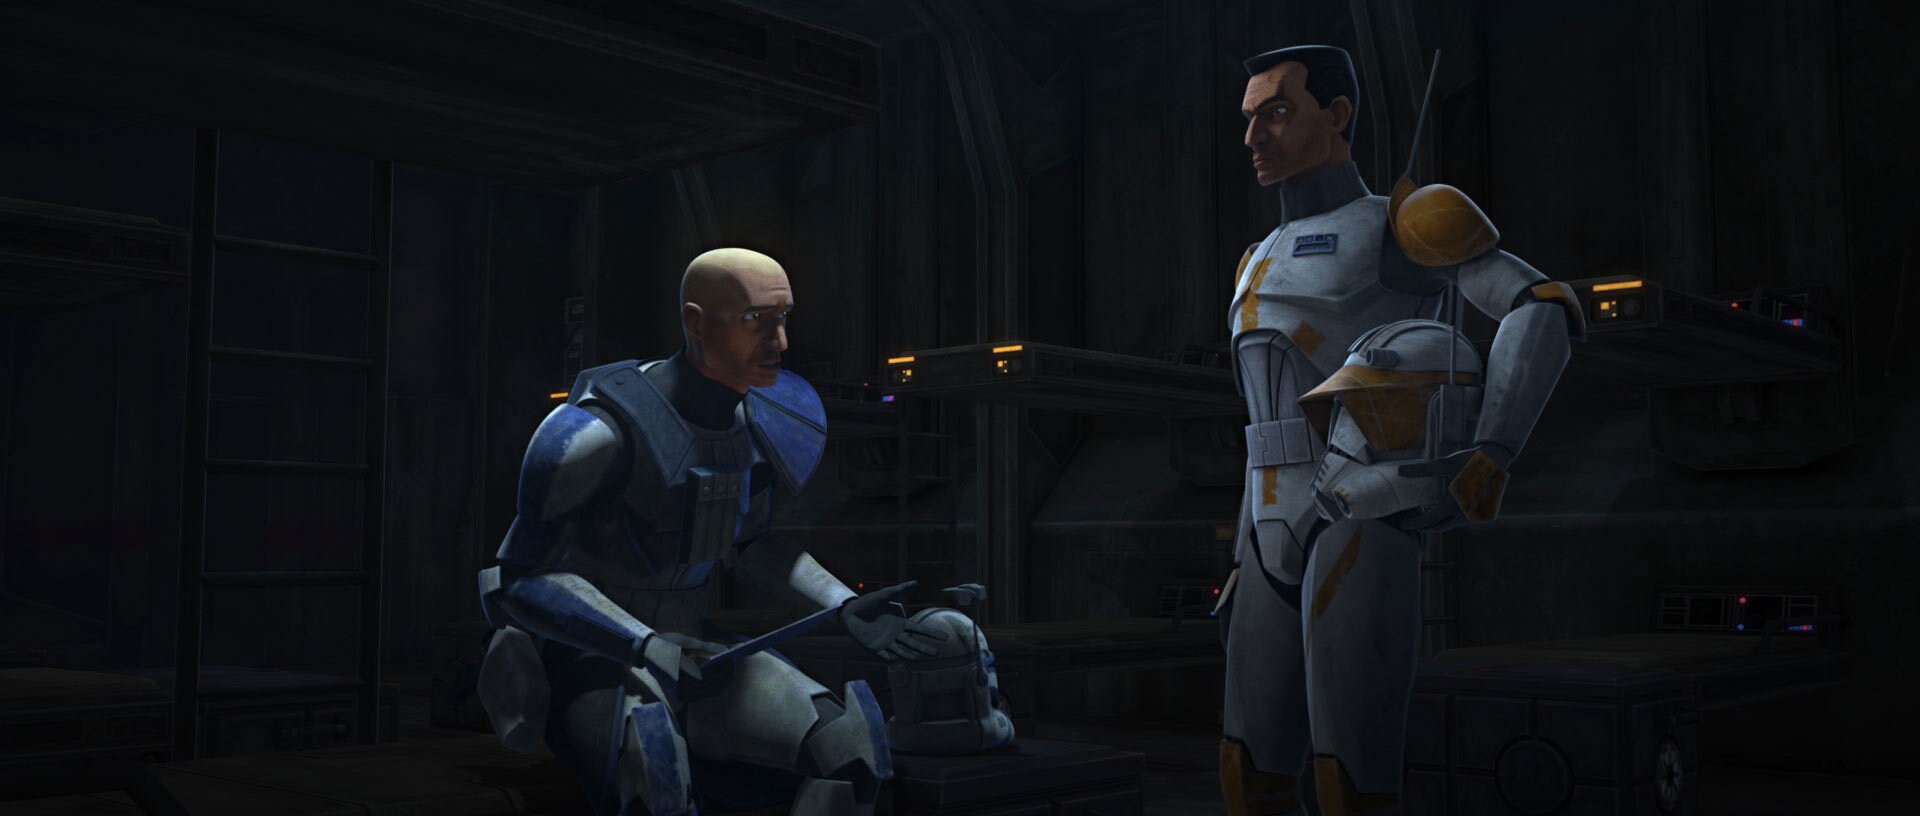 Rex and Cody speak in private. The decorated captain feels uneasy, wondering if Echo may still be...